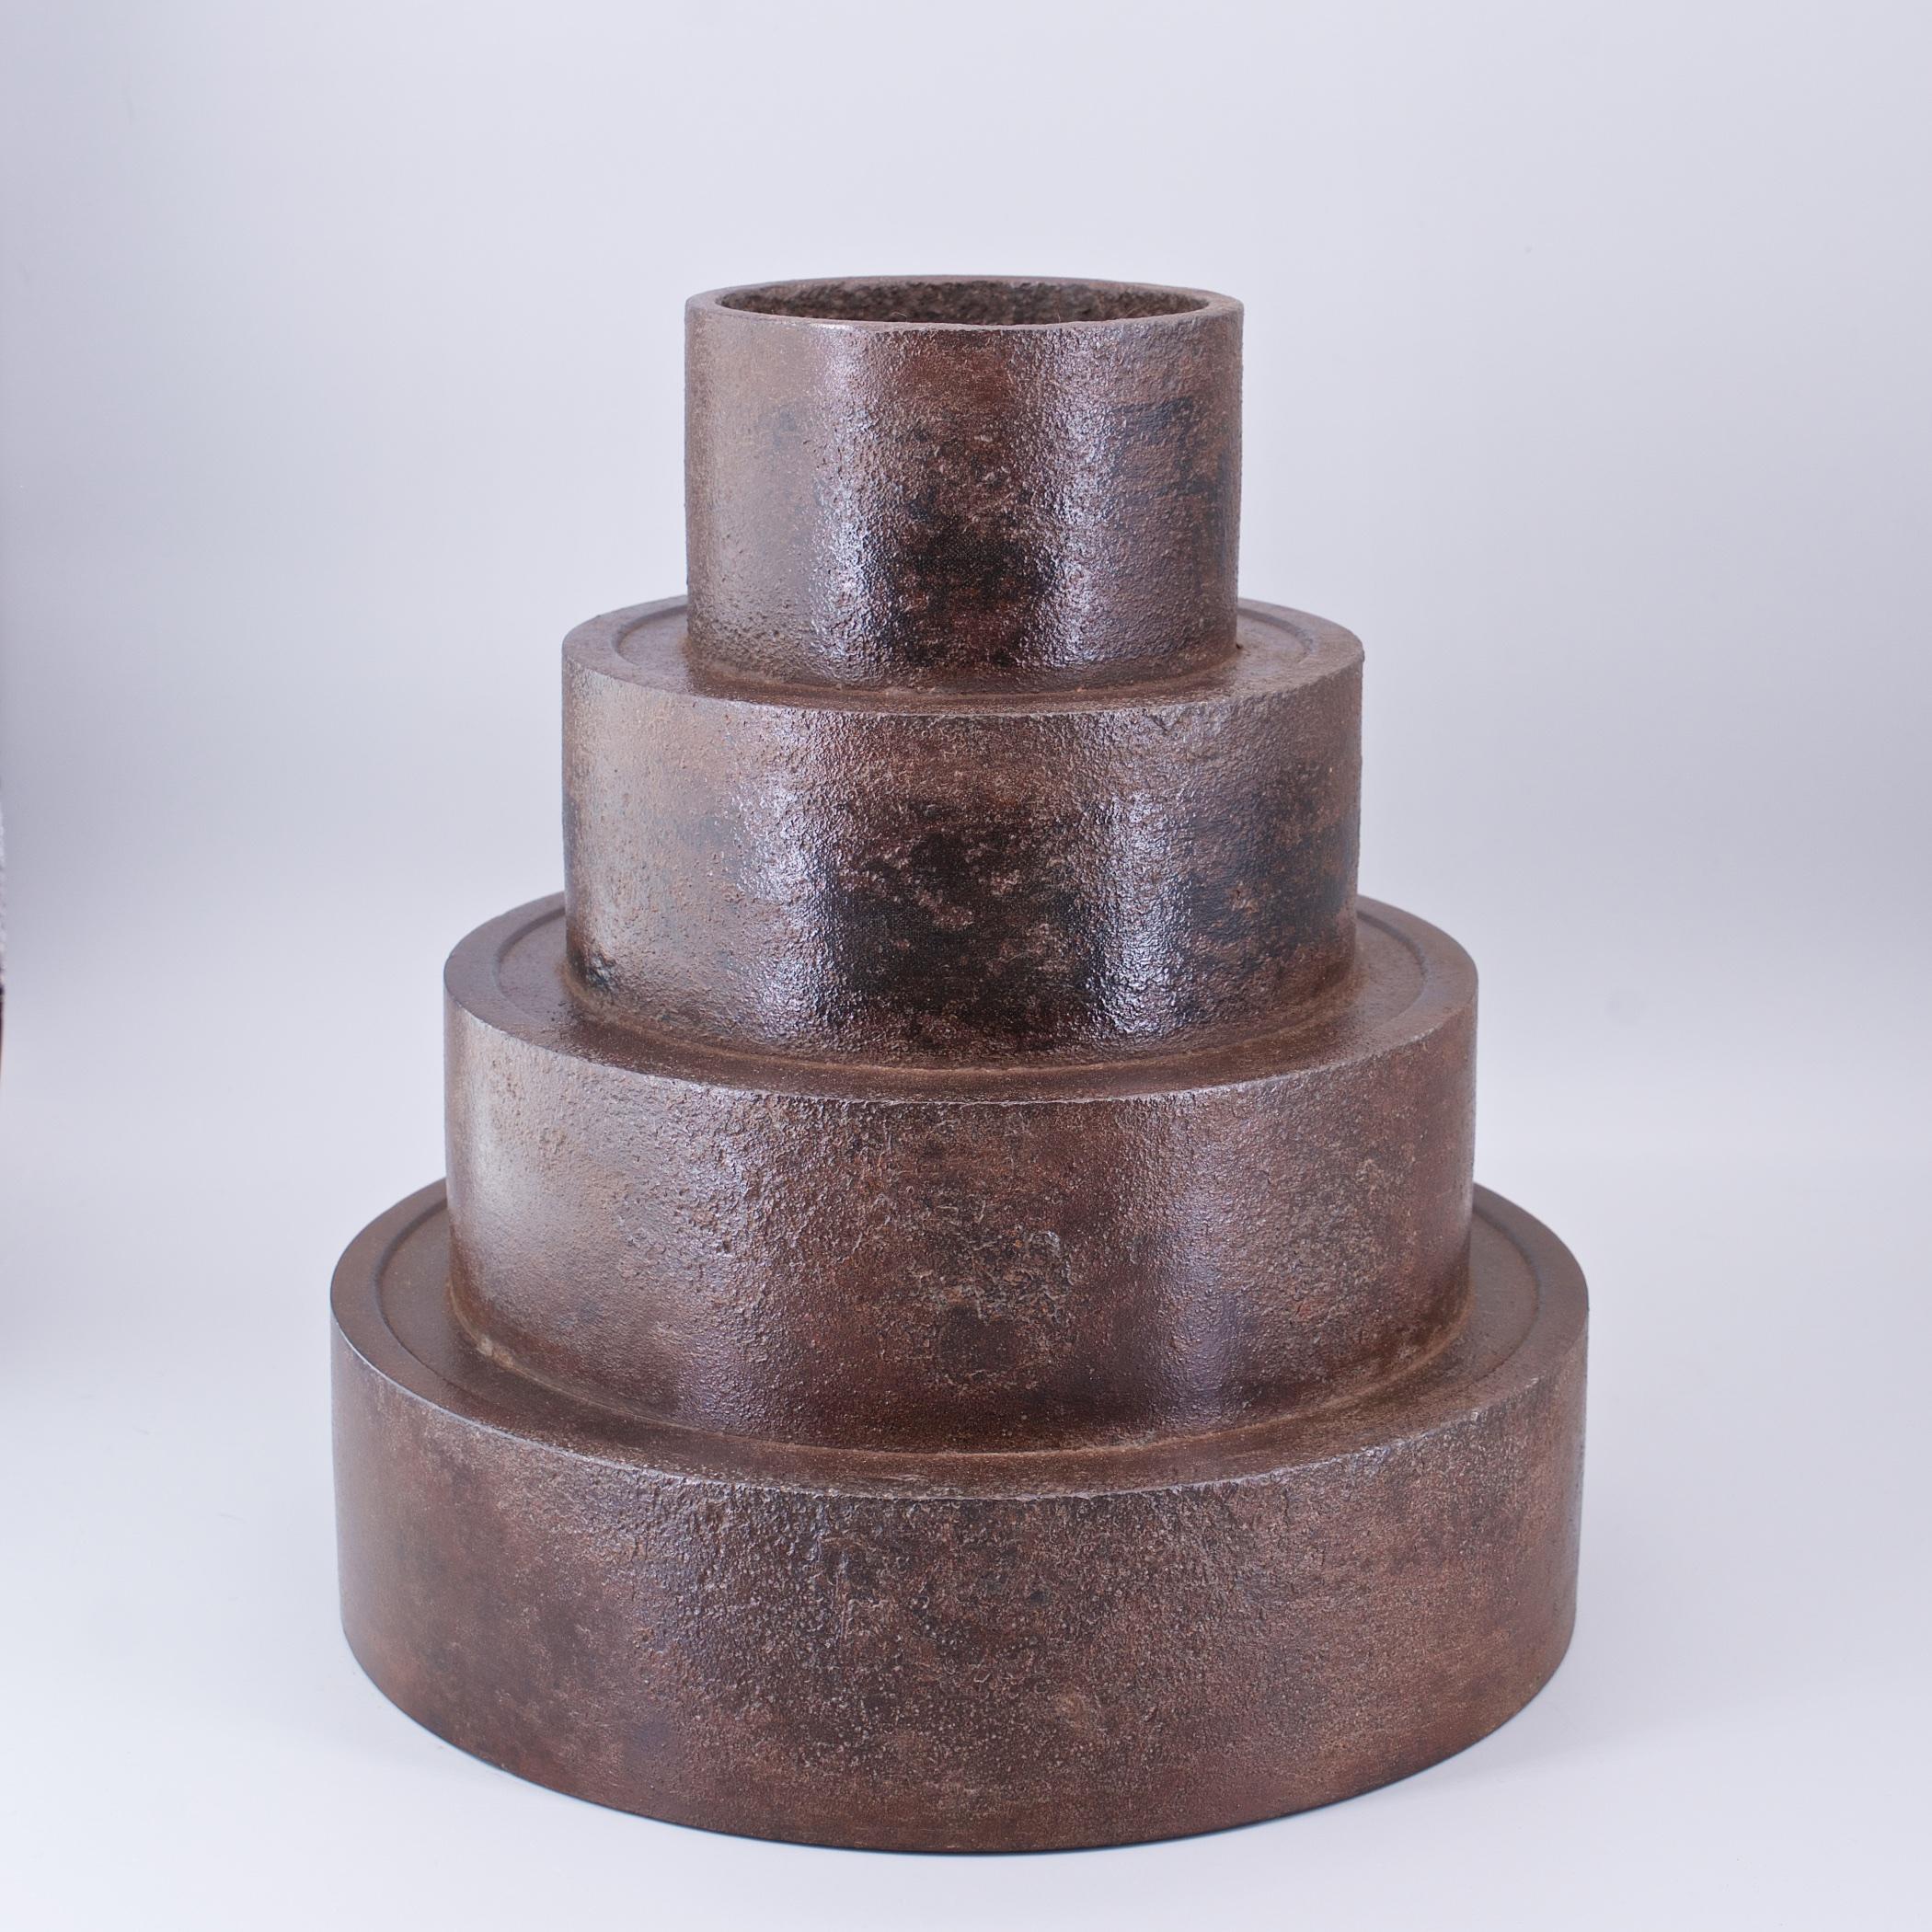 American Late 1800s Iron Concentric Form Geometric Table Sculpture Modernist Symmetry For Sale